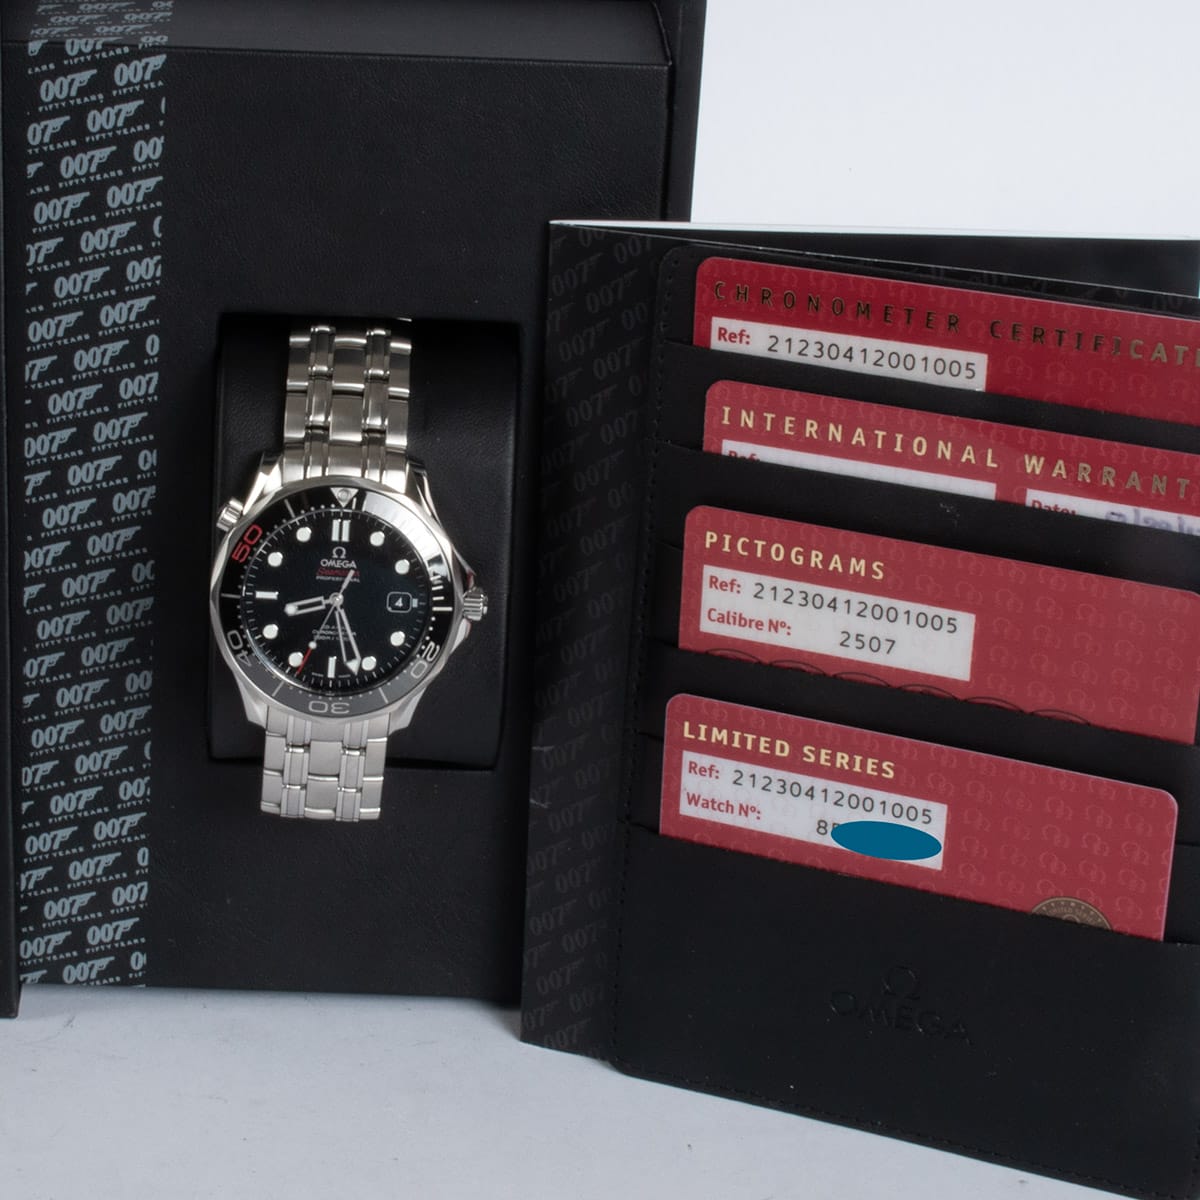 View in Box of Seamaster Professional James Bond 50th Anniversary Limited Edition